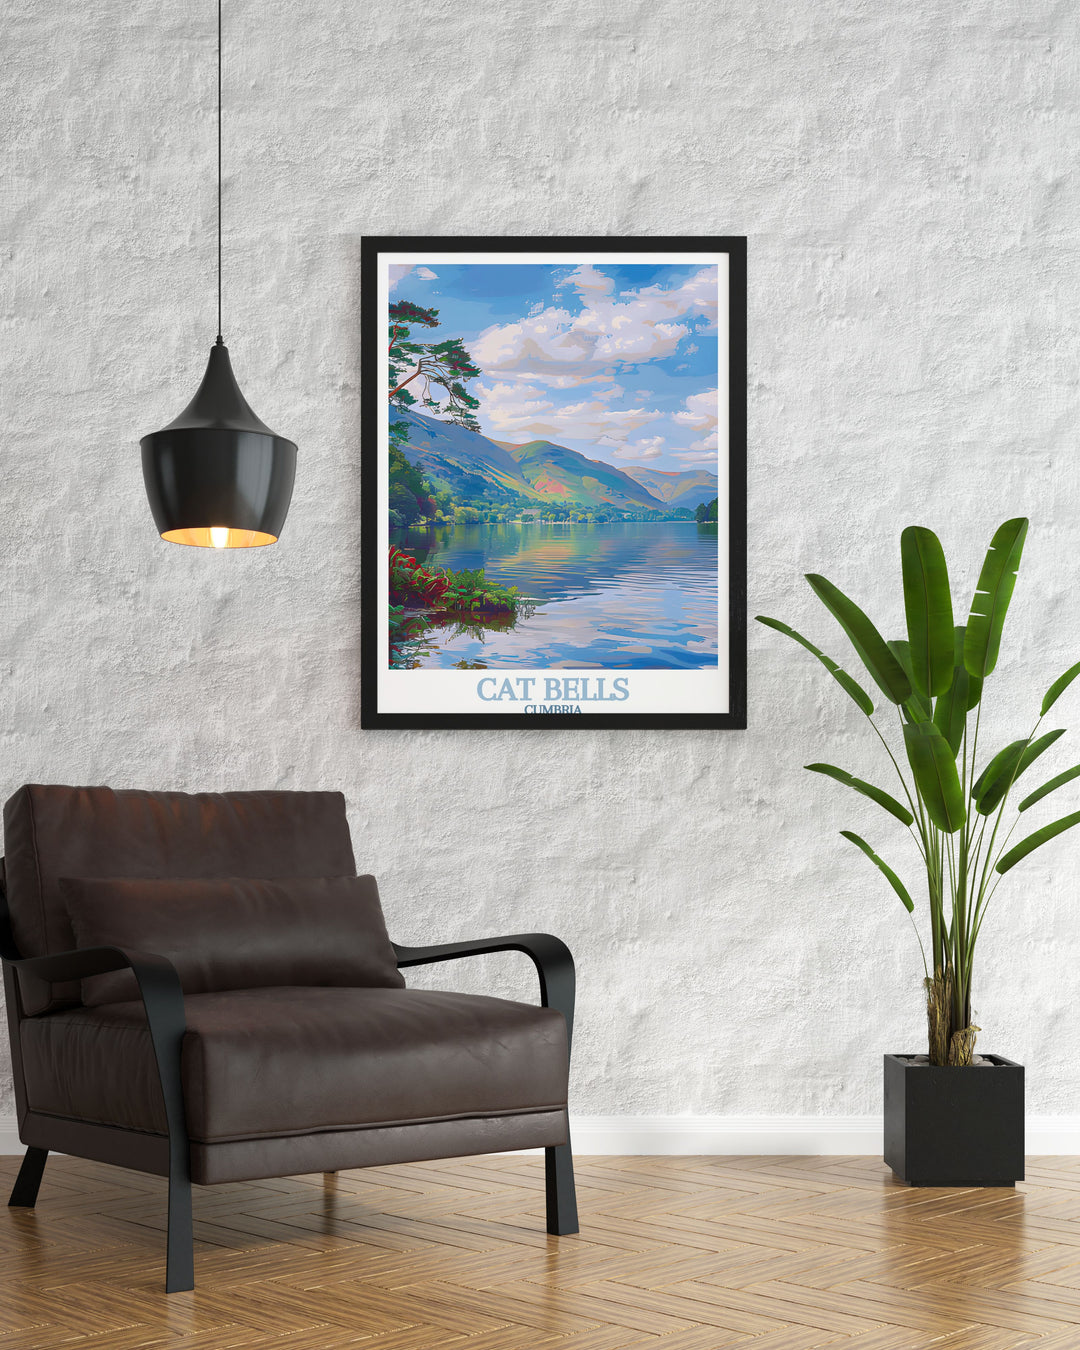 Enhance your home living decor with our Derwentwater vintage print this nature inspired artwork showcases the tranquil beauty of the Lake District perfect for wall art and gifts for hikers and those who appreciate natural beauty.